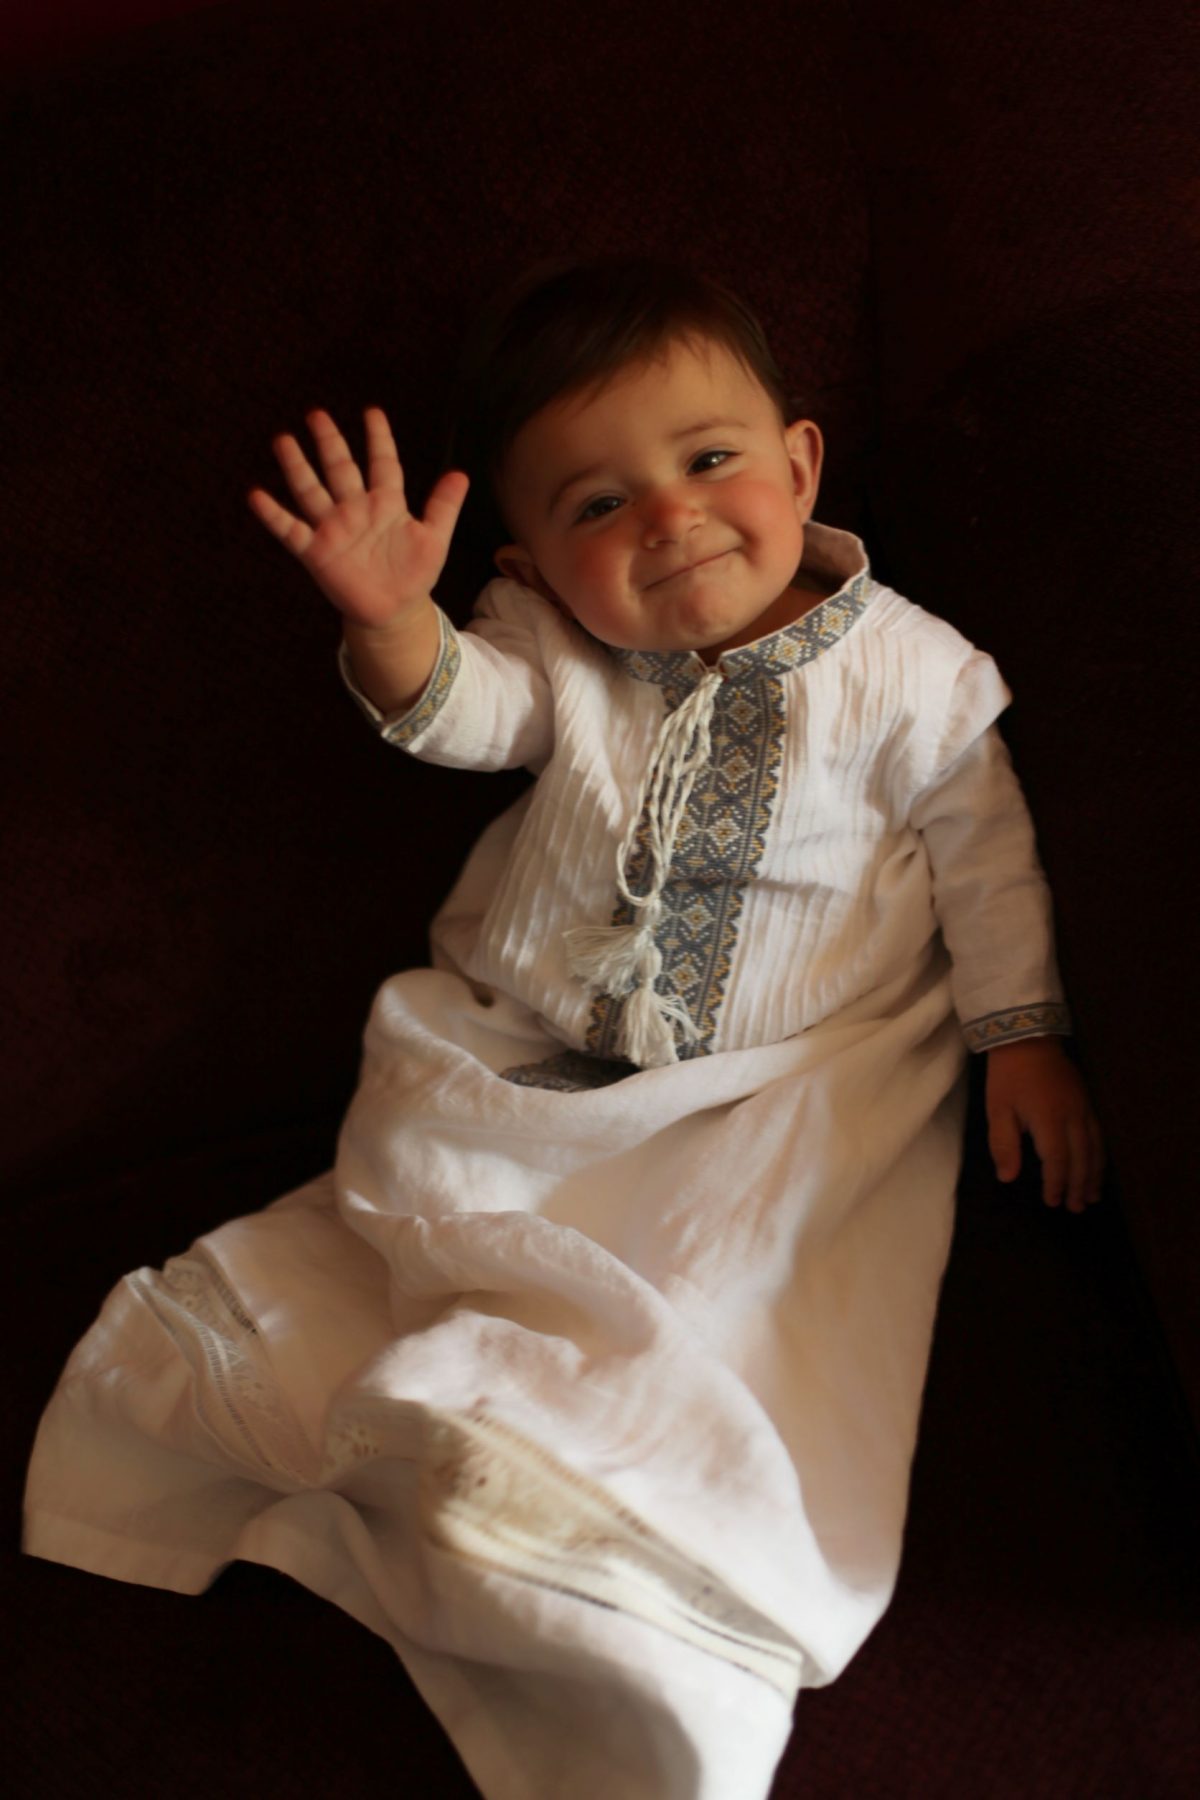 An Infant Indian Toddler Boy Dressed In Traditional Indian Dhoti Kurta  Bengali Cultural Dress Stock Photo, Picture and Royalty Free Image. Image  152153491.